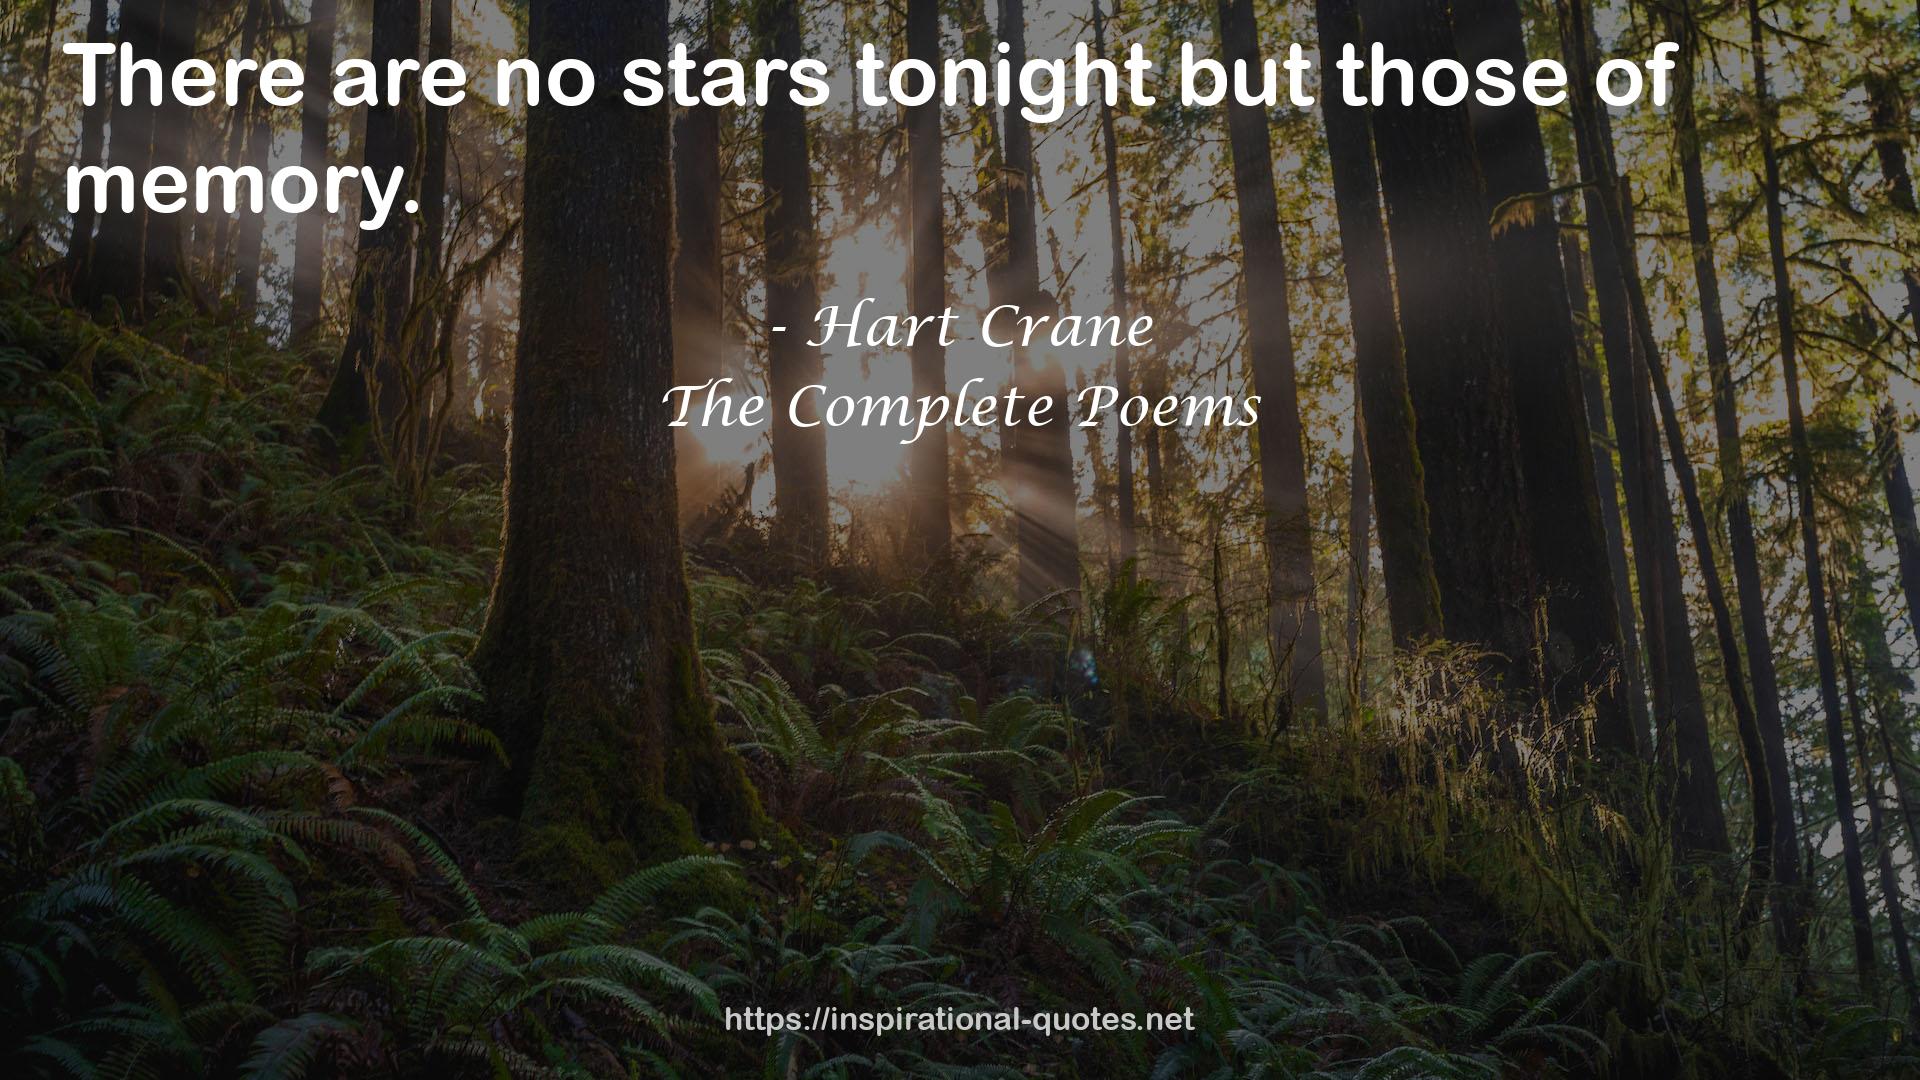 The Complete Poems QUOTES